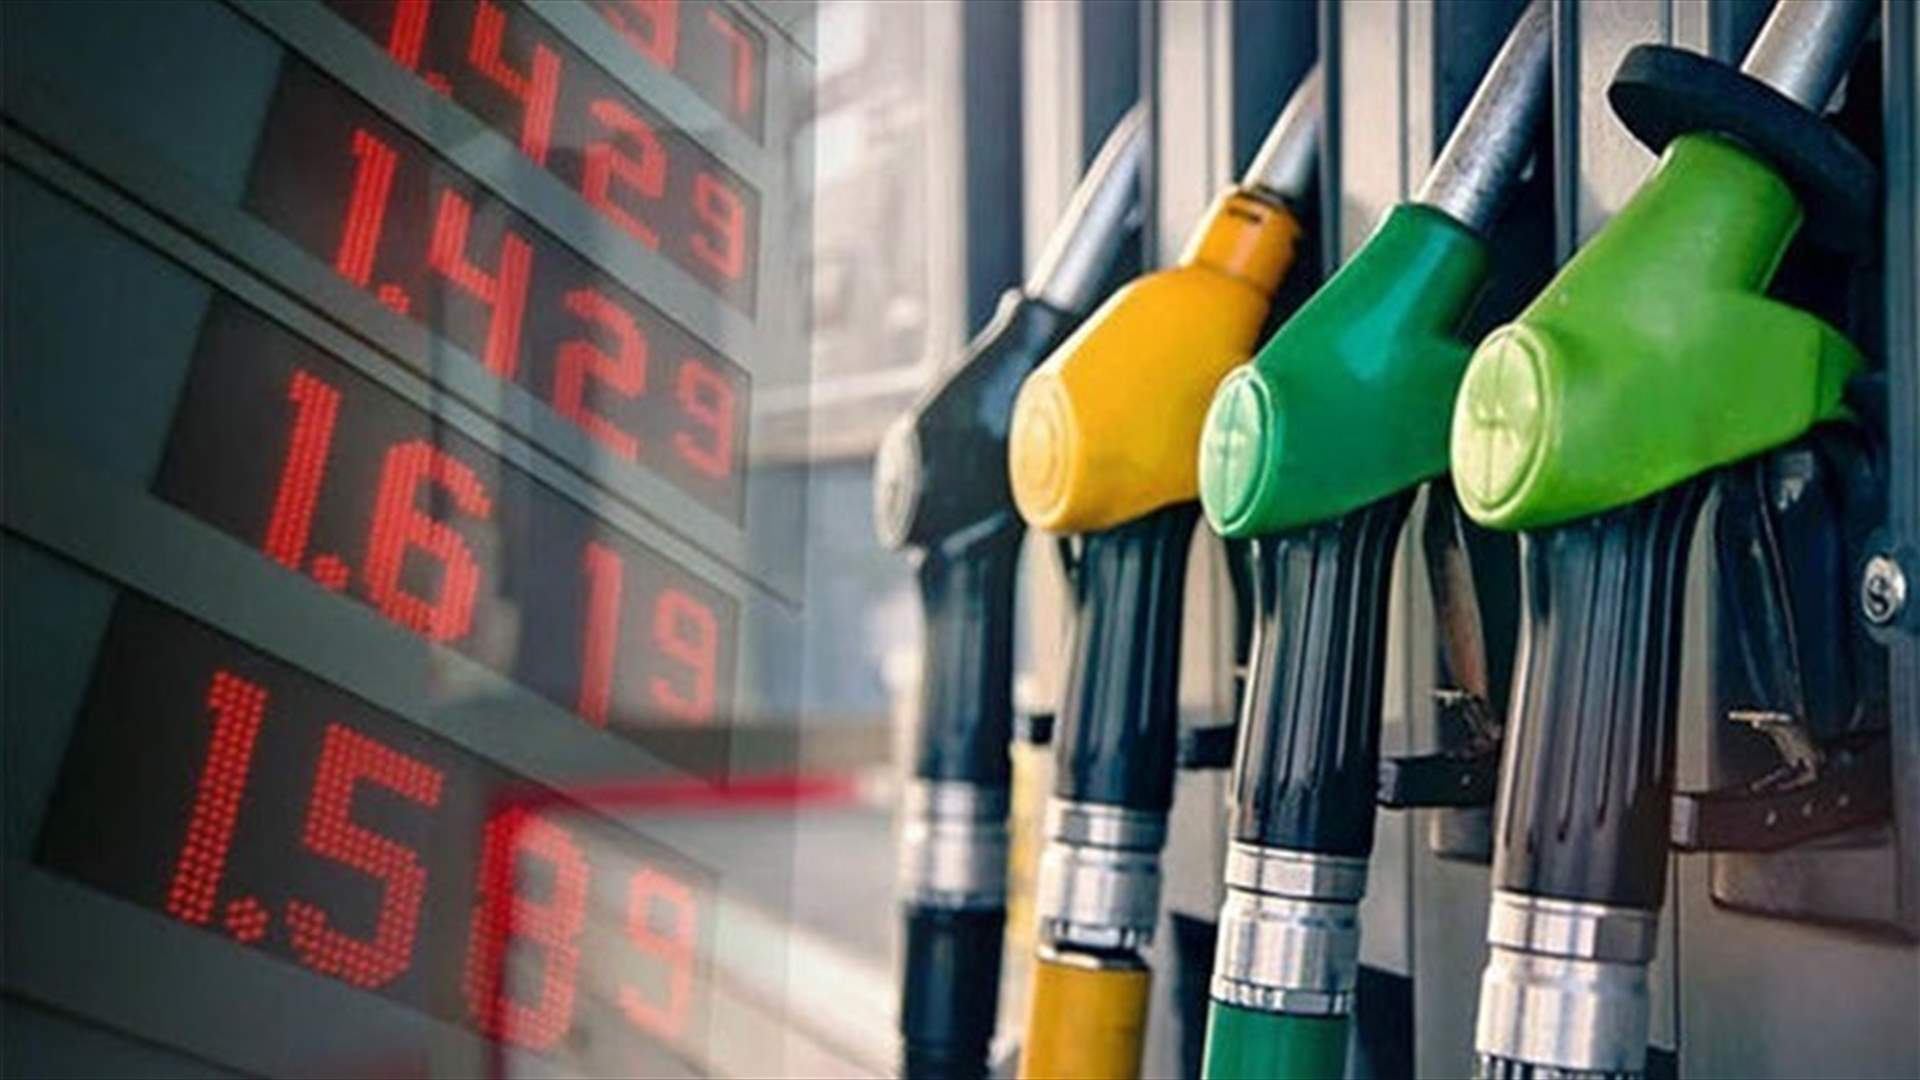 Gasoline prices drop, diesel and gas prices increase